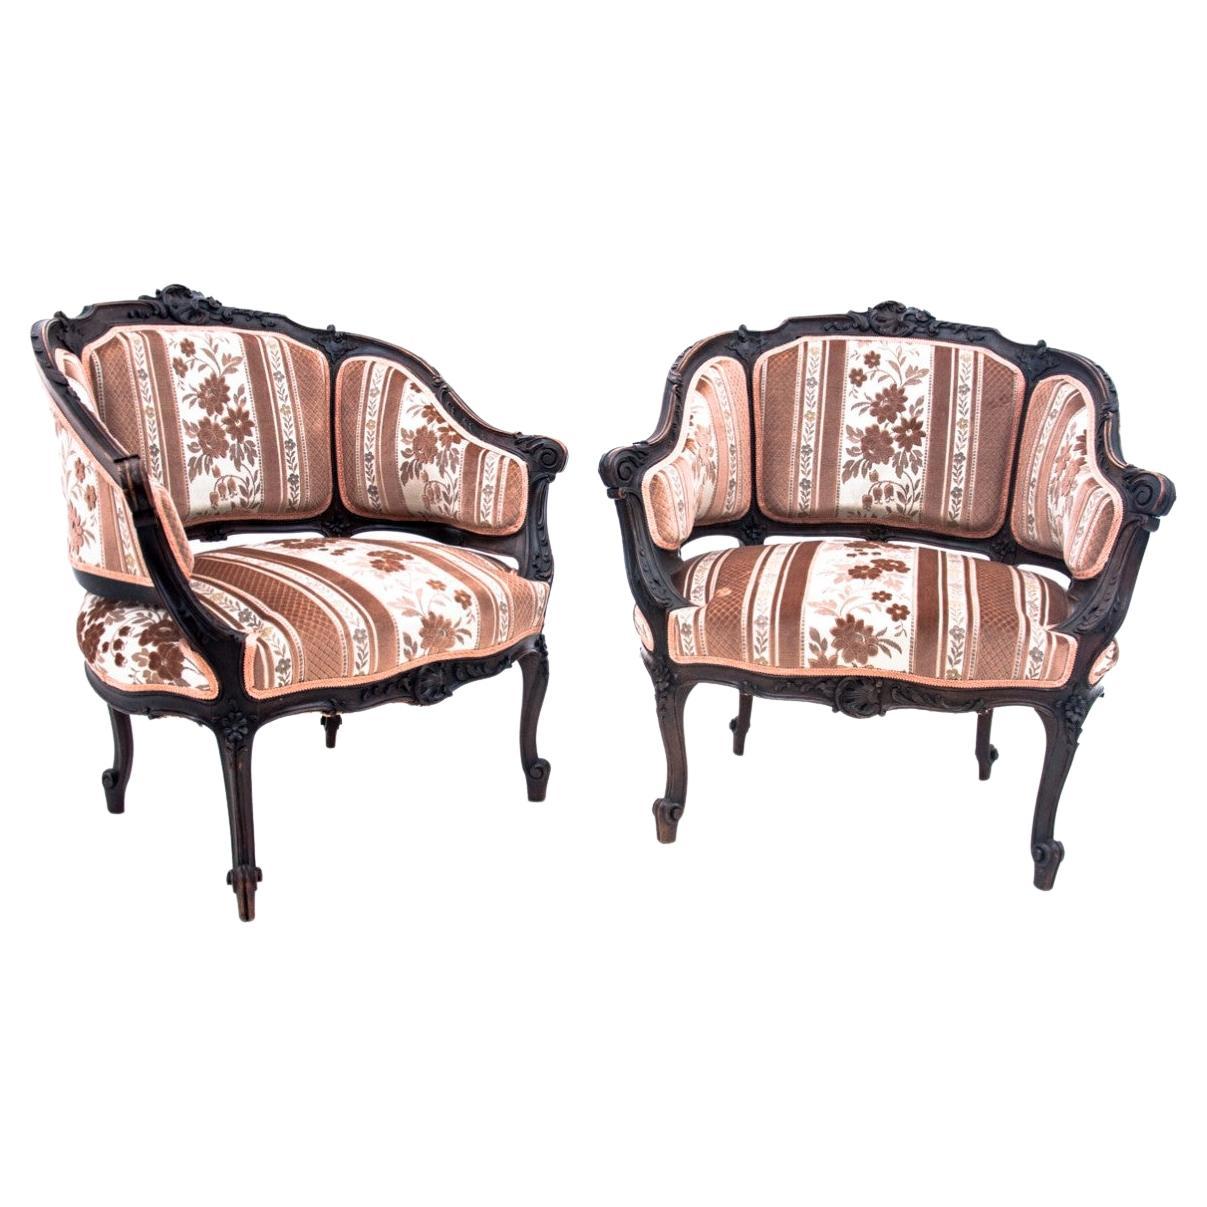 Pair of French Bergere Chairs, circa 1900s. 